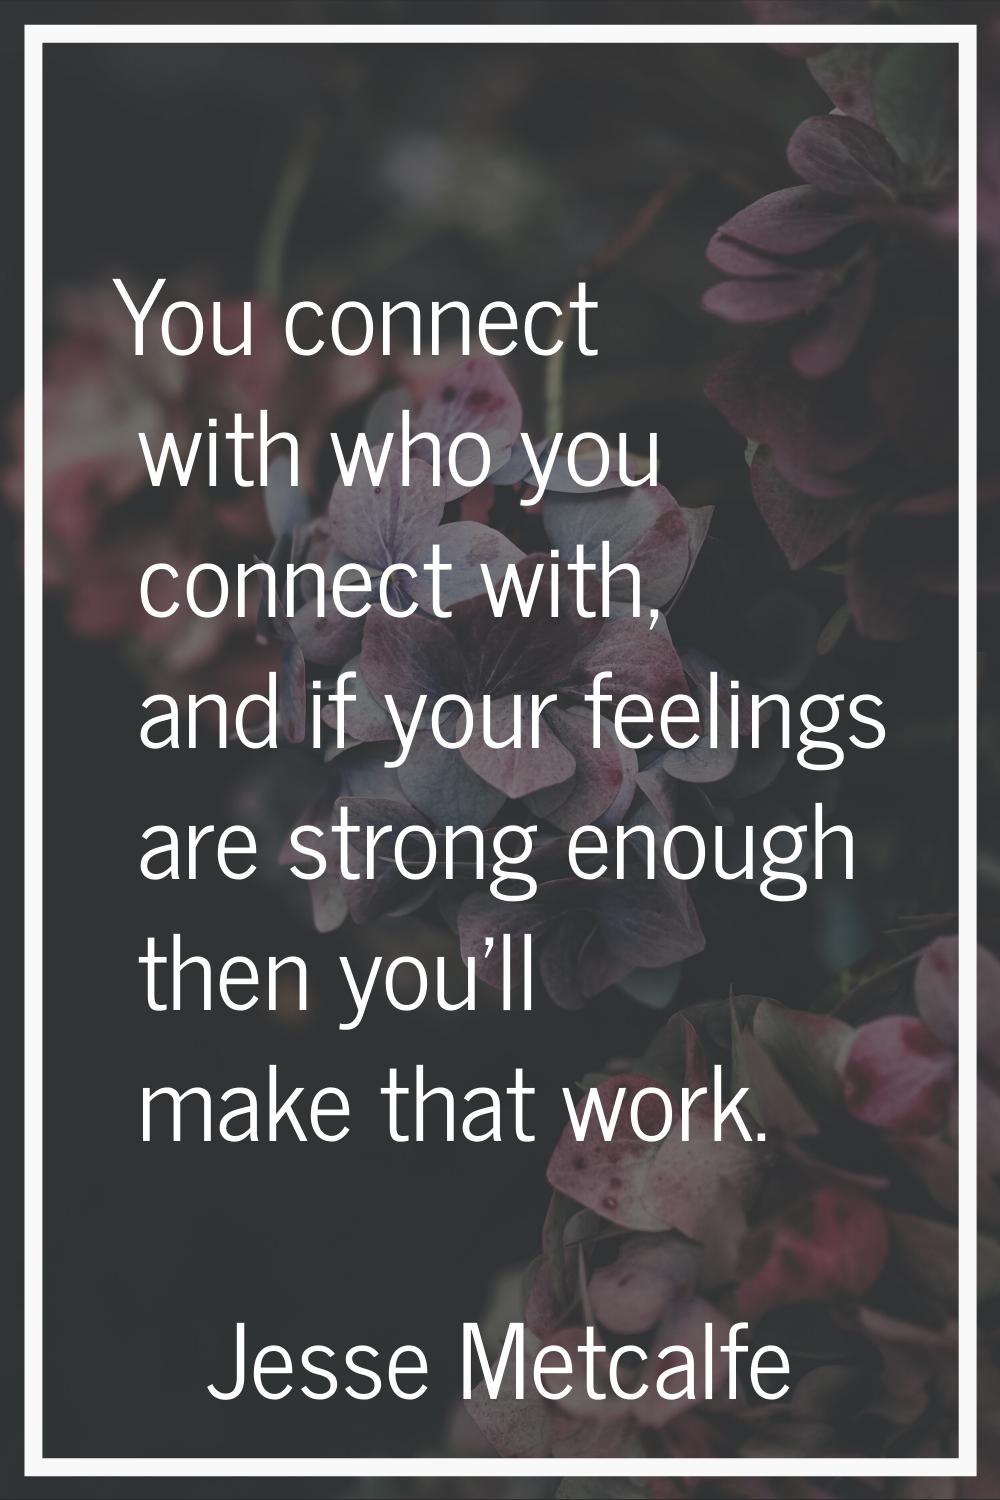 You connect with who you connect with, and if your feelings are strong enough then you'll make that